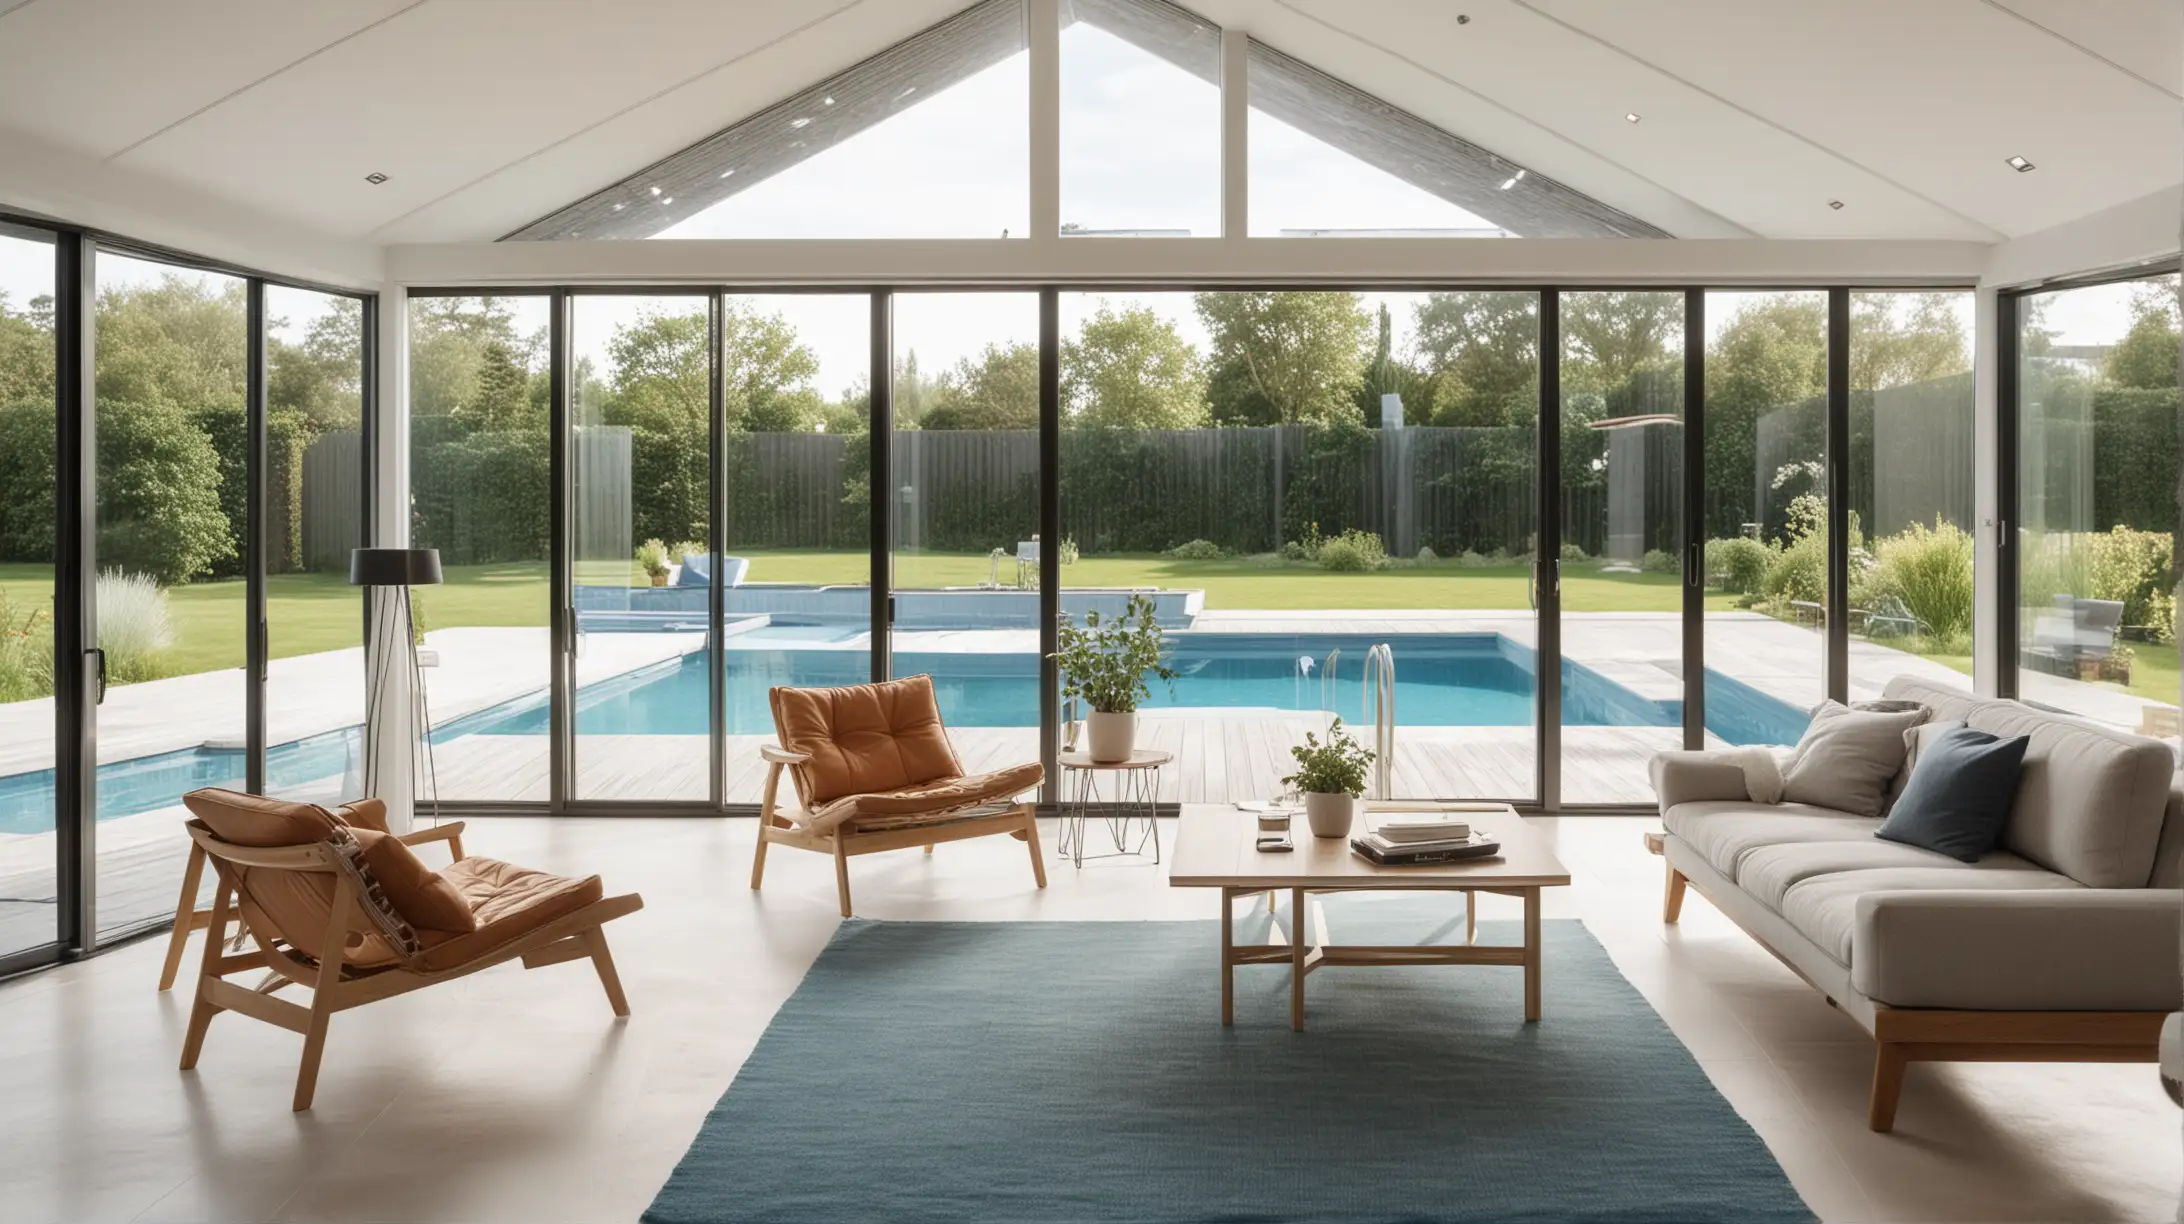 A living room of a beautiful bright modern Scandinavian style house with large windows opening onto a swimming pool. The room is globally well illuminated and the photograph is taken with a Canon EOS 5D with a wide aperture lens set to F/8 and ISO set to 400